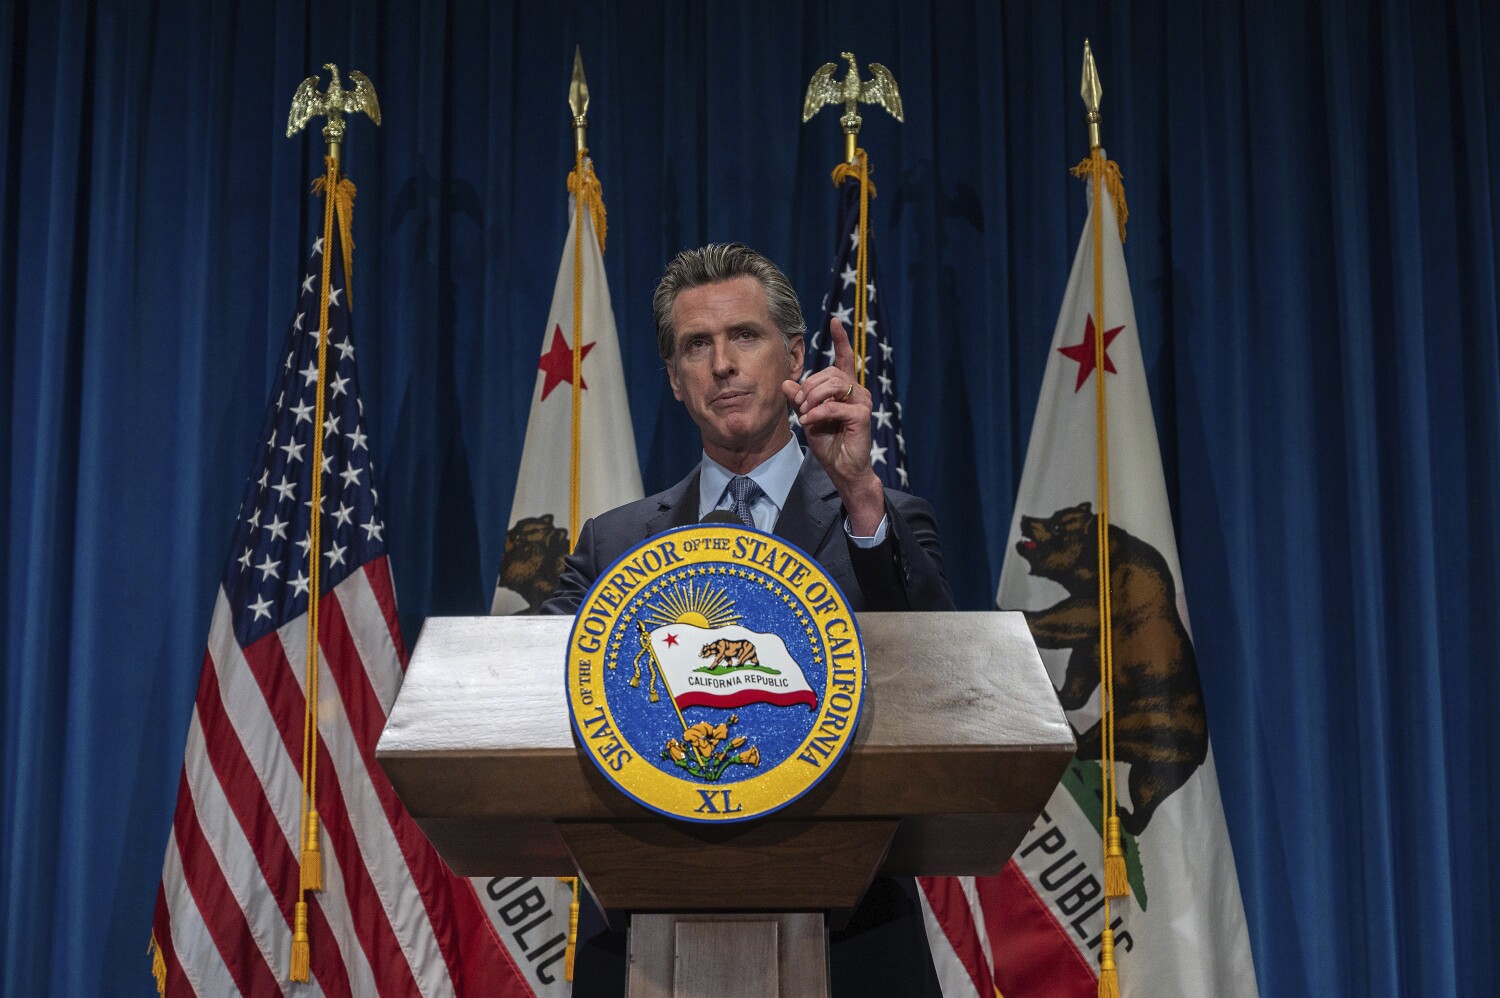 Even with huge California surplus, Newsom's budget relies on reserves, analyst says